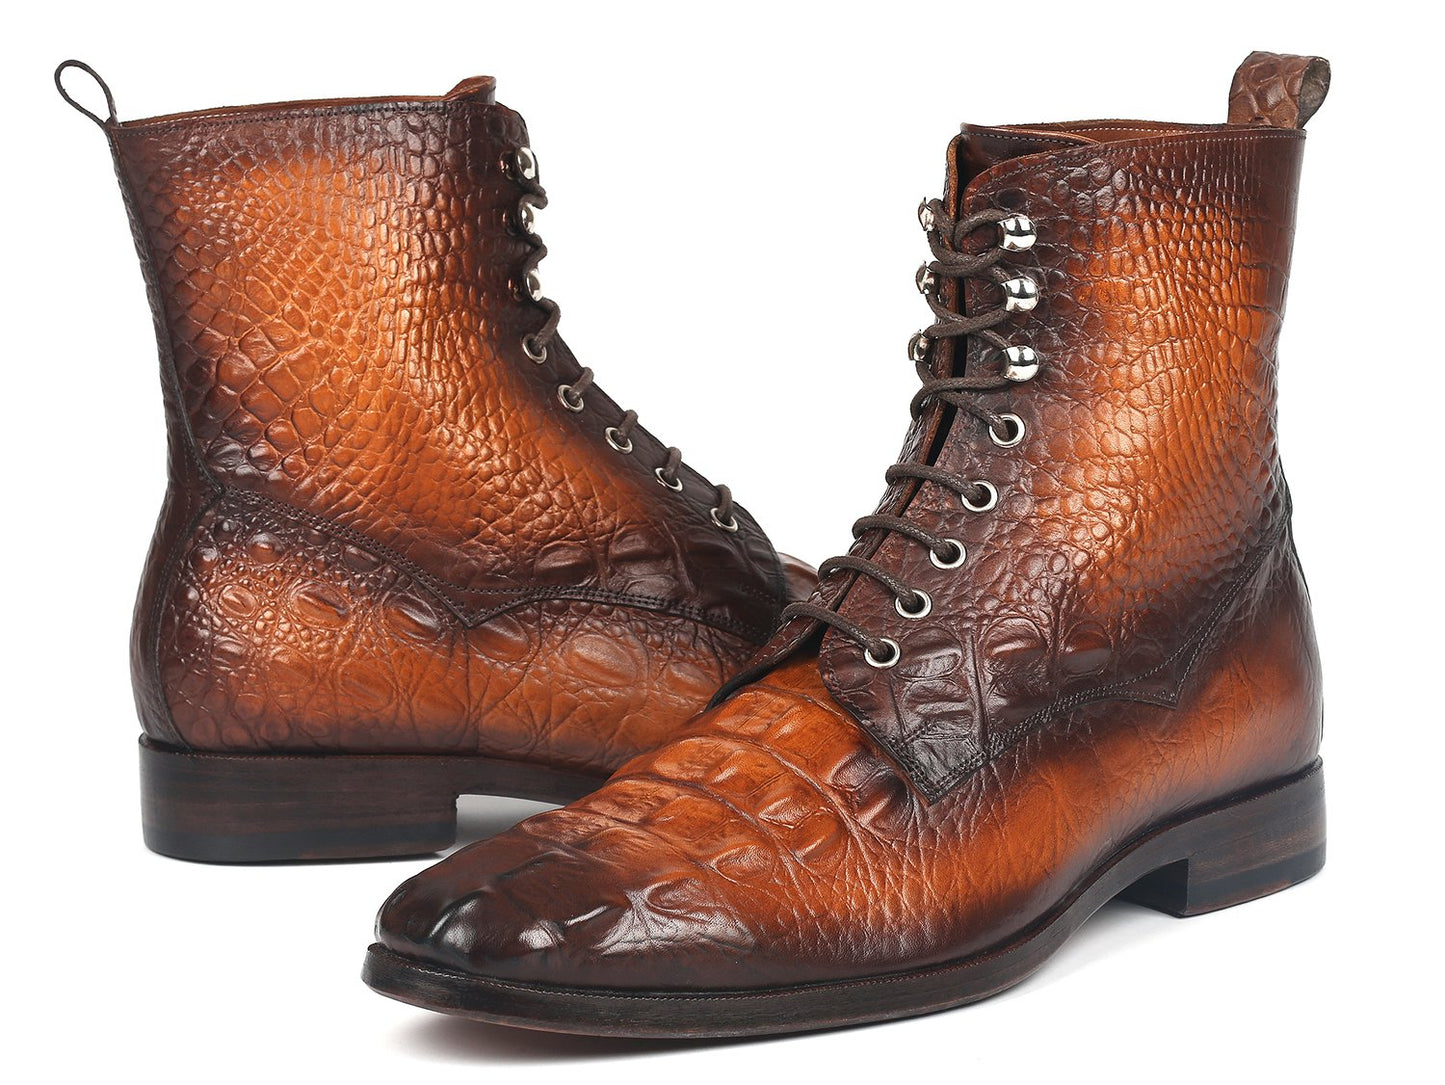 Paul Parkman Men's Brown Croco Embossed Leather Lace-Up Boots (ID#BT744-BRW)